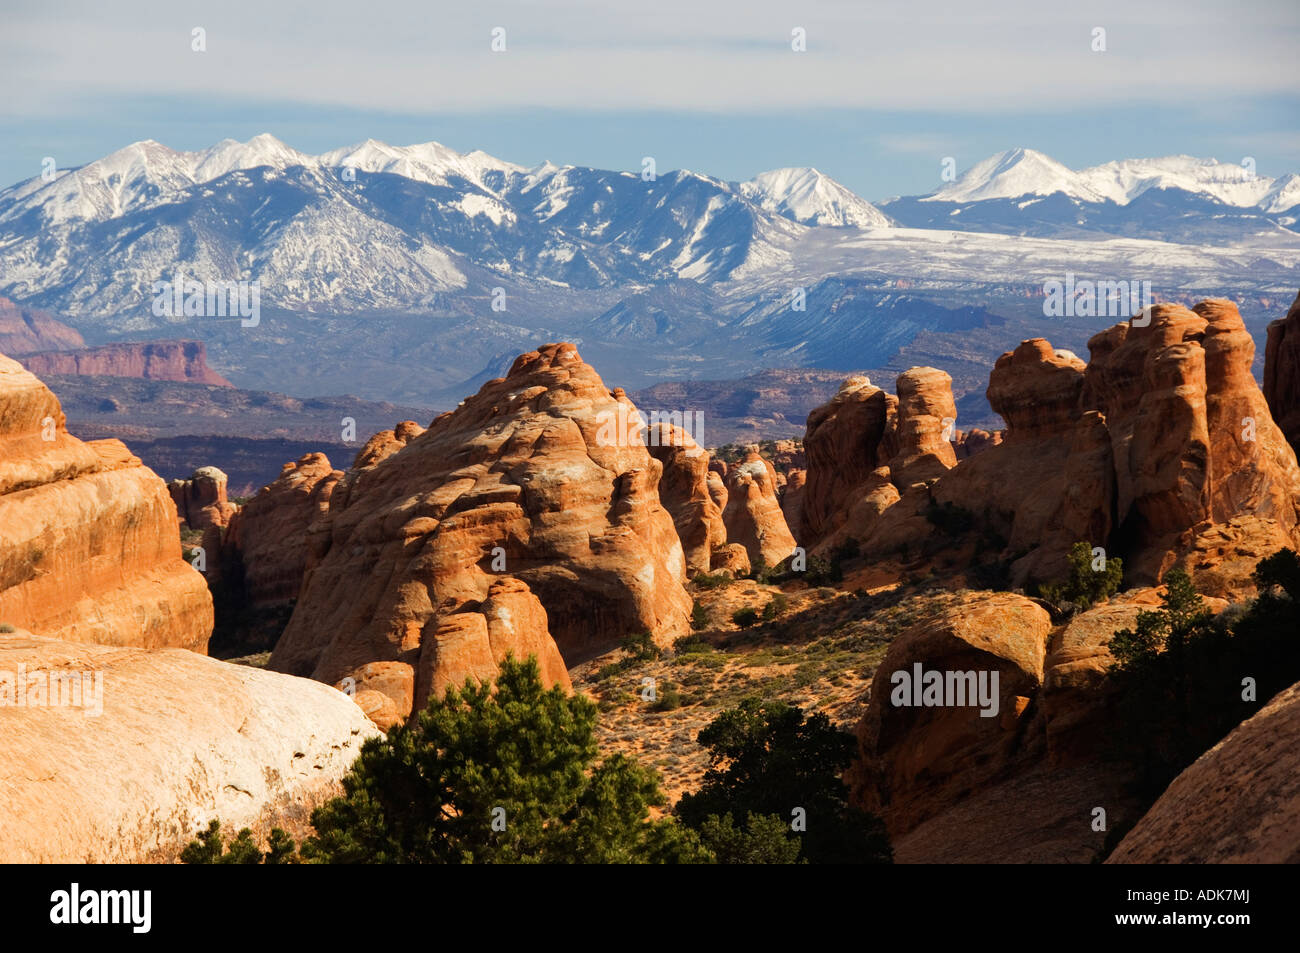 USA Utah Arches National Park snow capped mountains of Manti La Sal National Forest and sandstone pinnacles at the Devils Garden Stock Photo